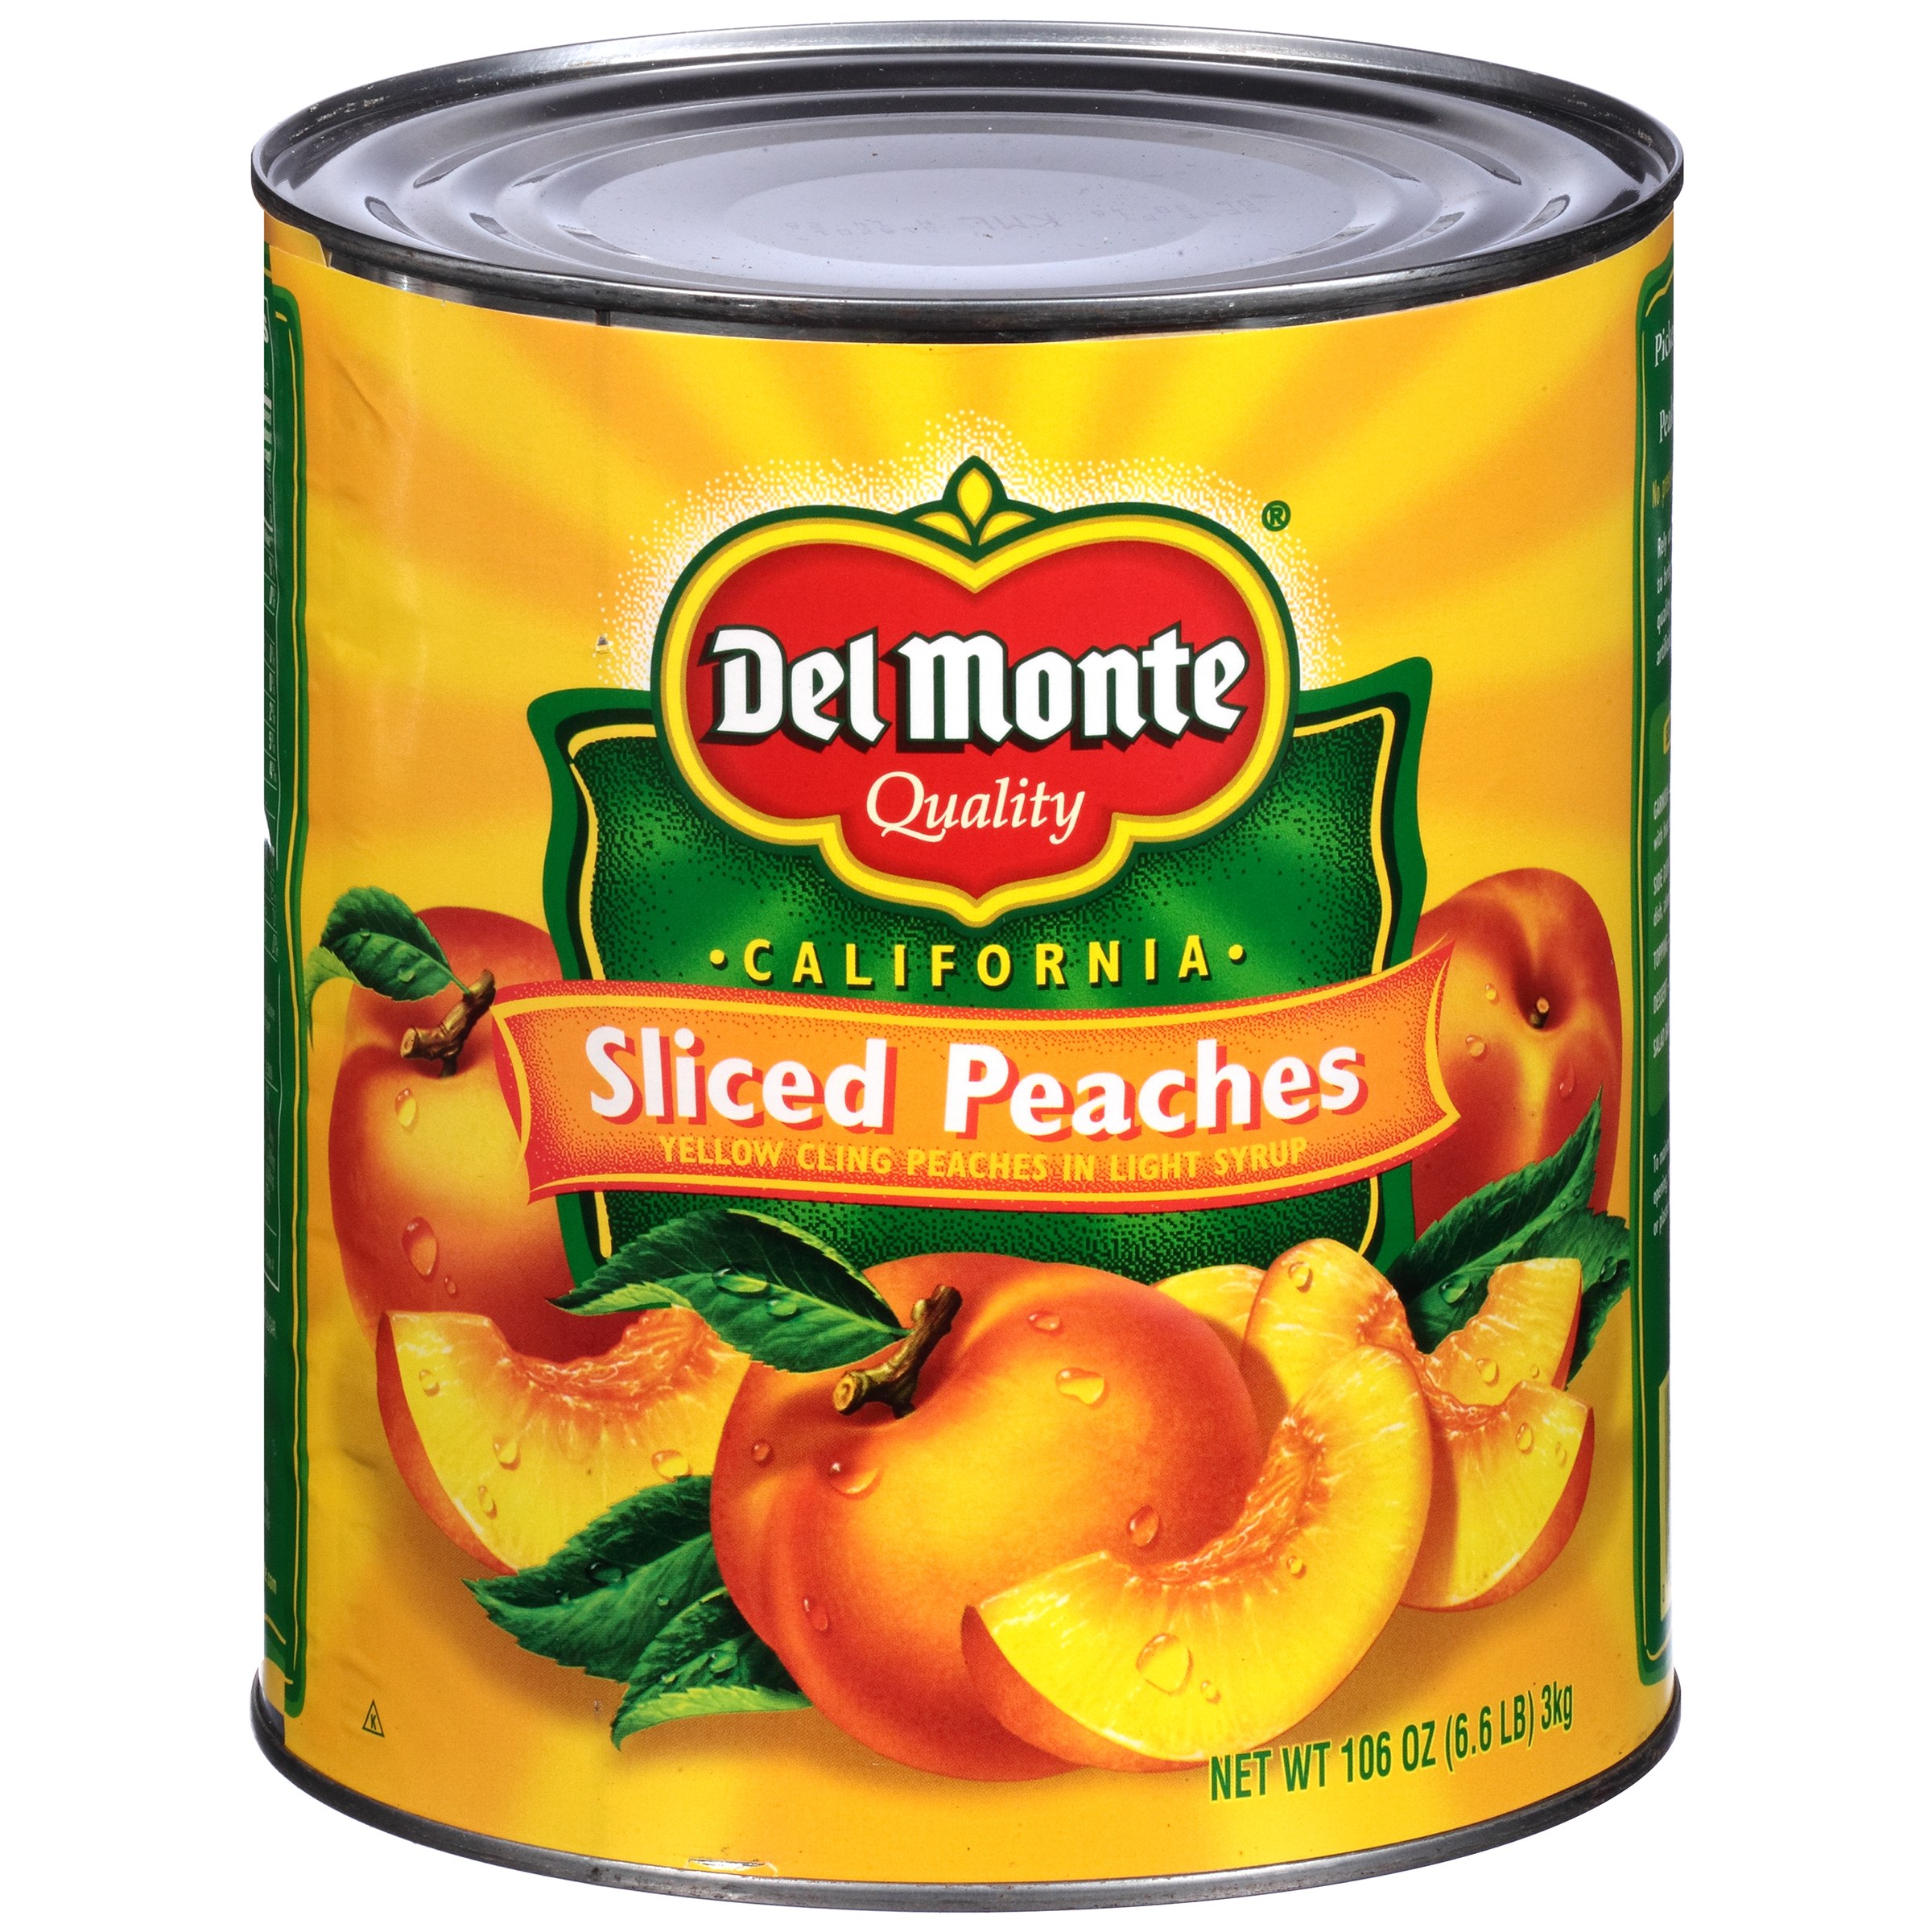 Del Monte Lite Yellow Cling Sliced Peaches, Canned Fruit, 106 oz Can - image 1 of 6